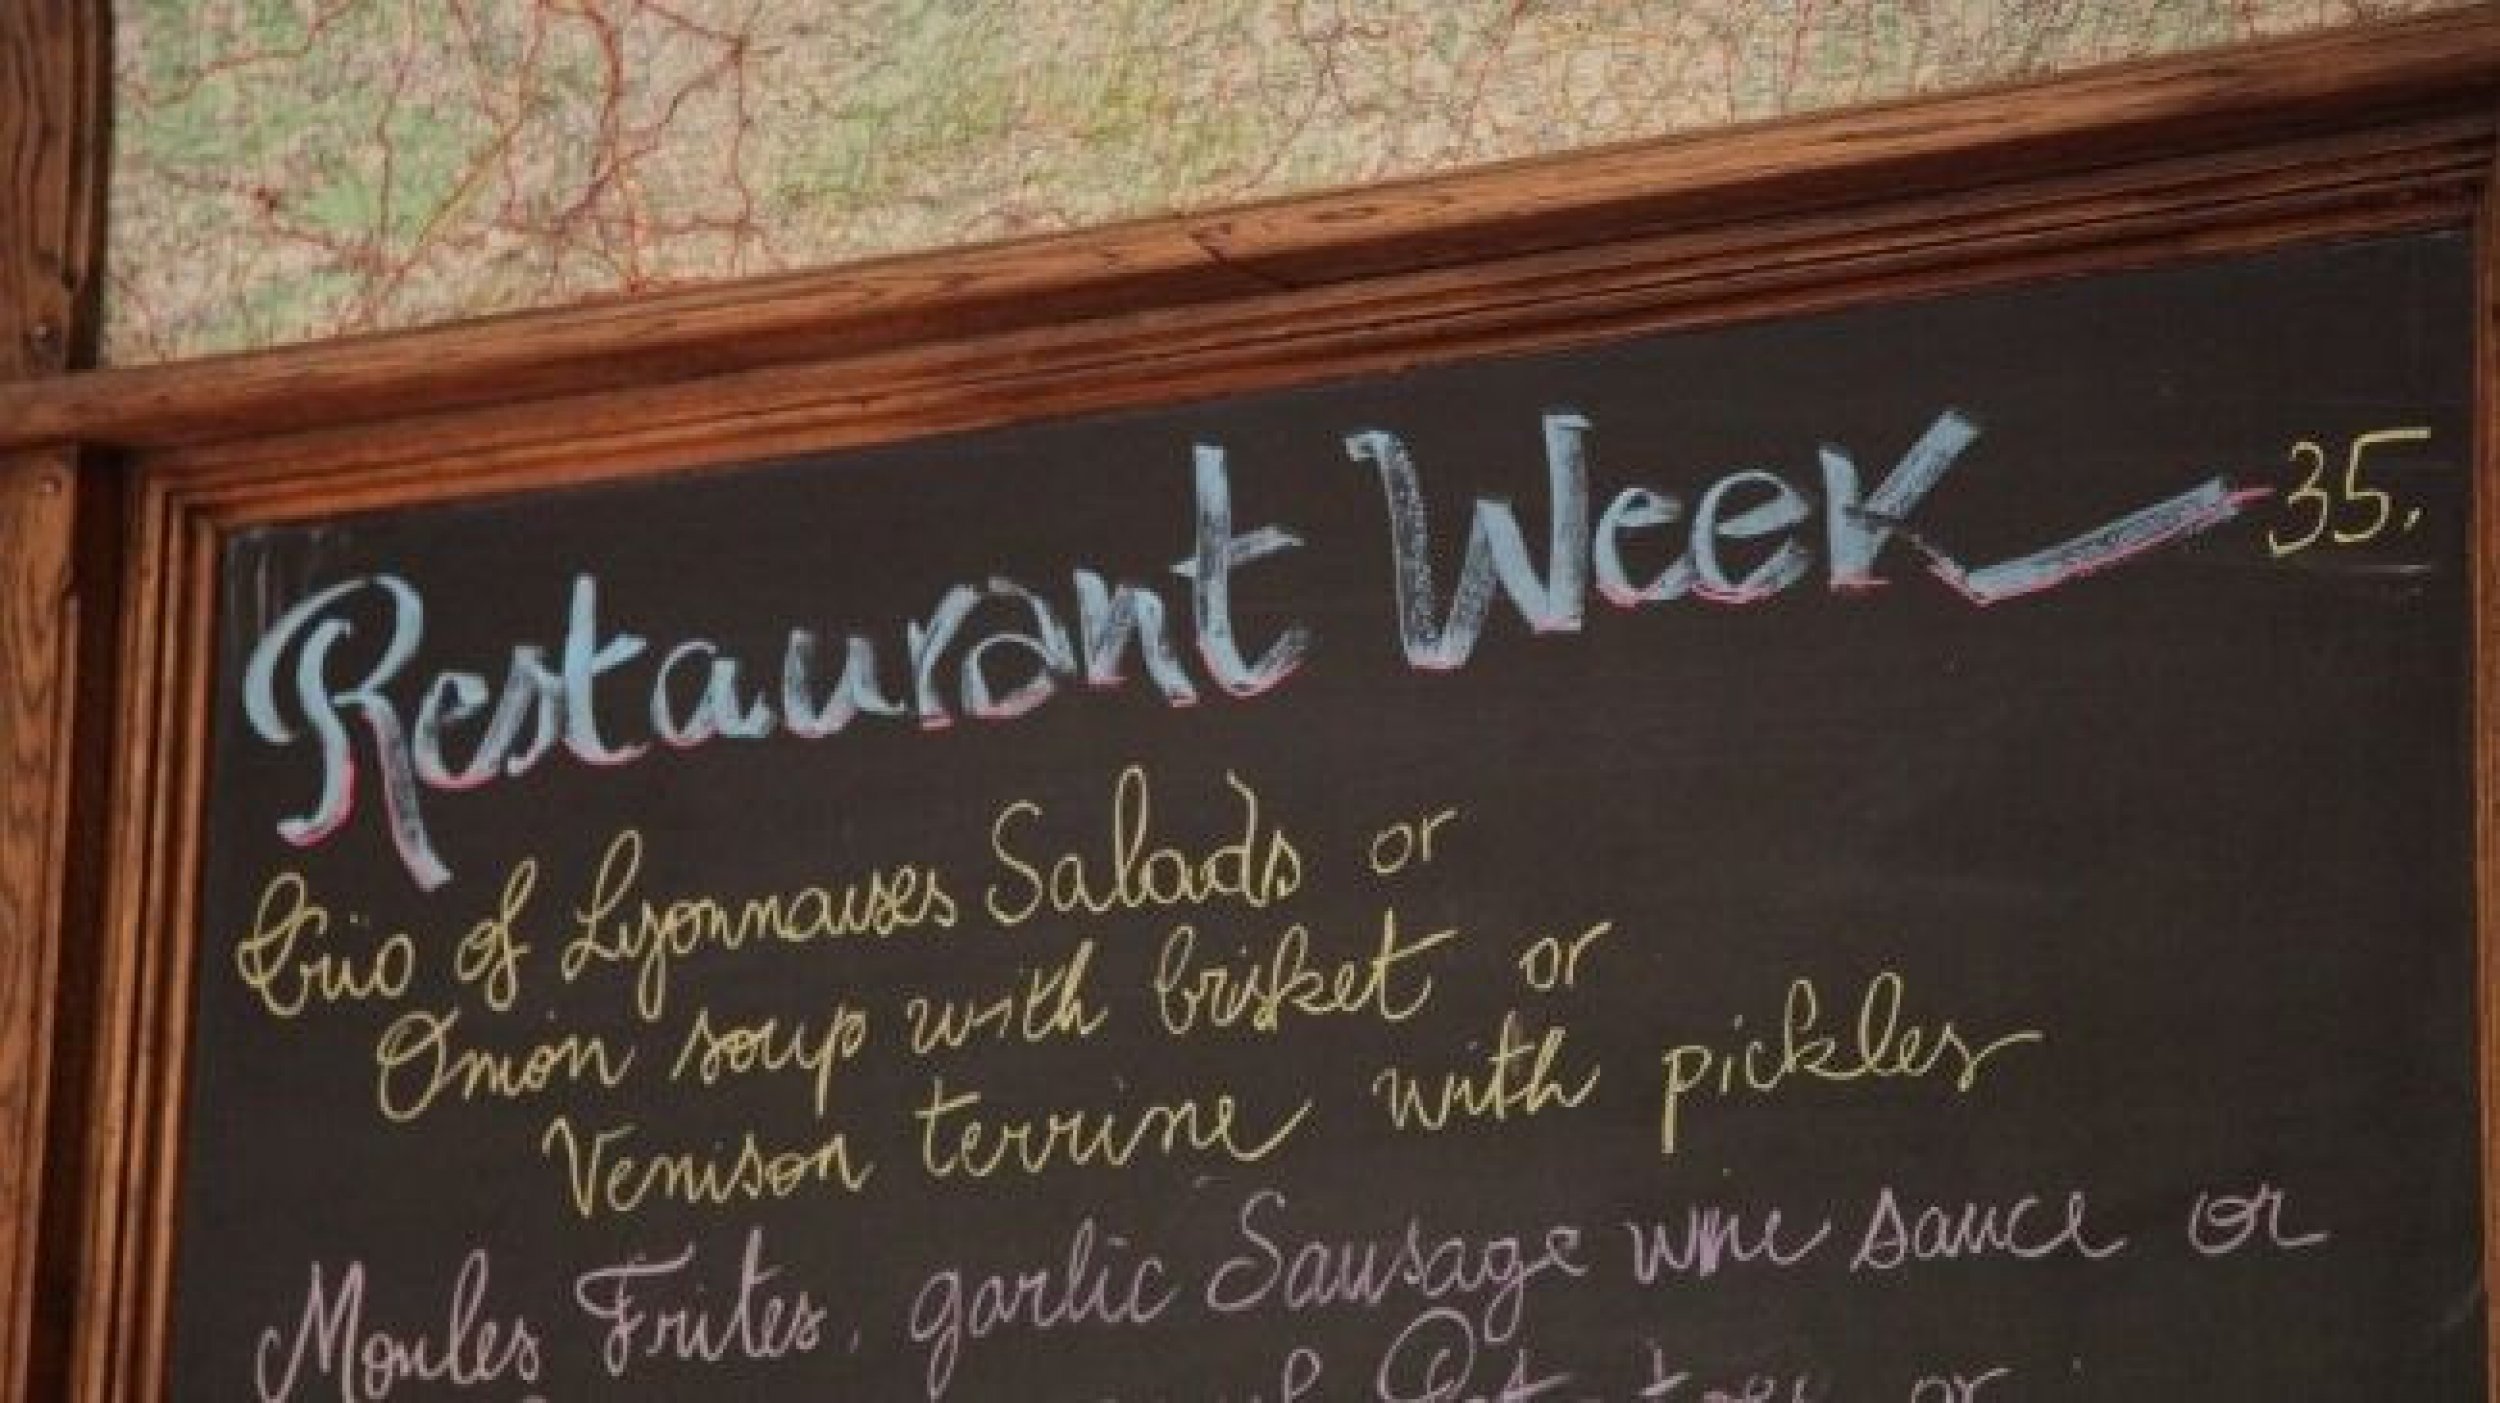 NYC Restaurant Week Lyon, A French Bouchon With a New York Twist